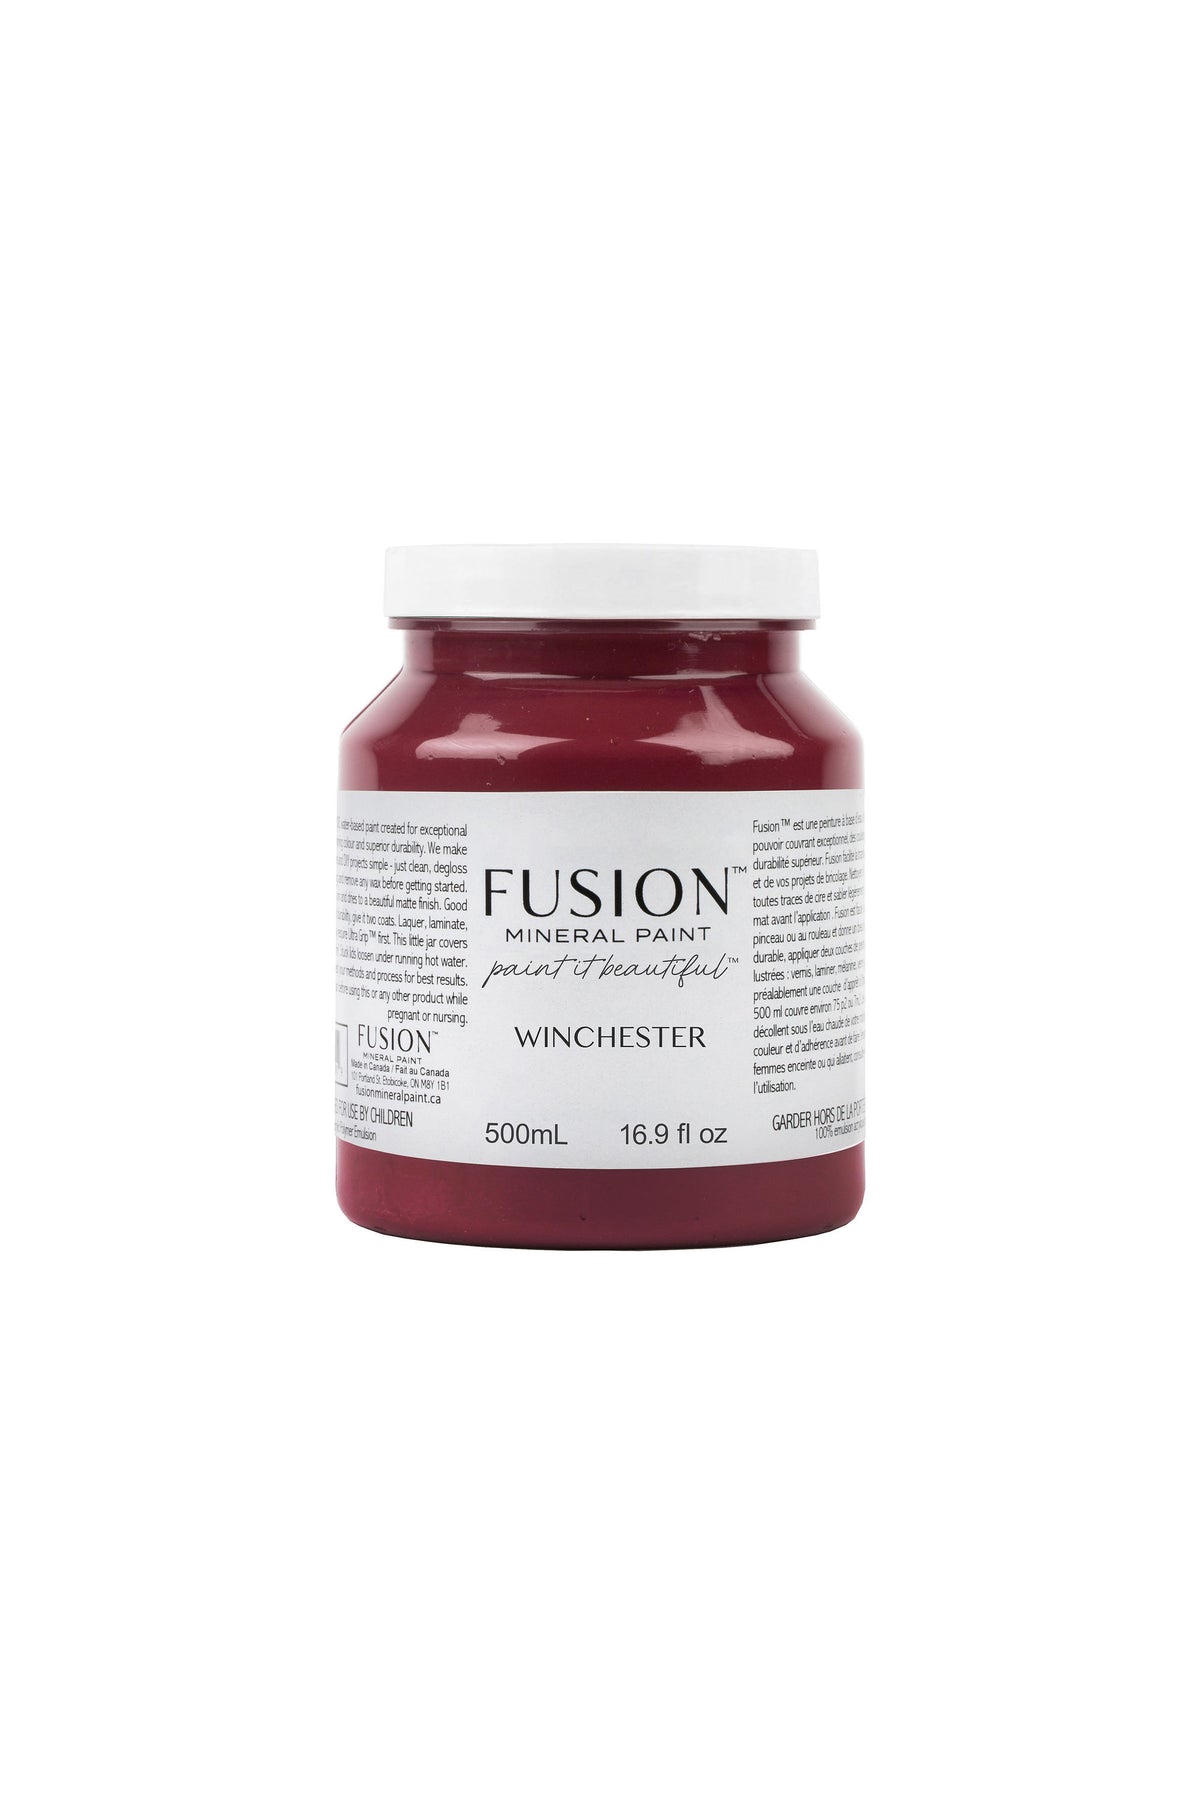 Winchester-Fusion Mineral Paint